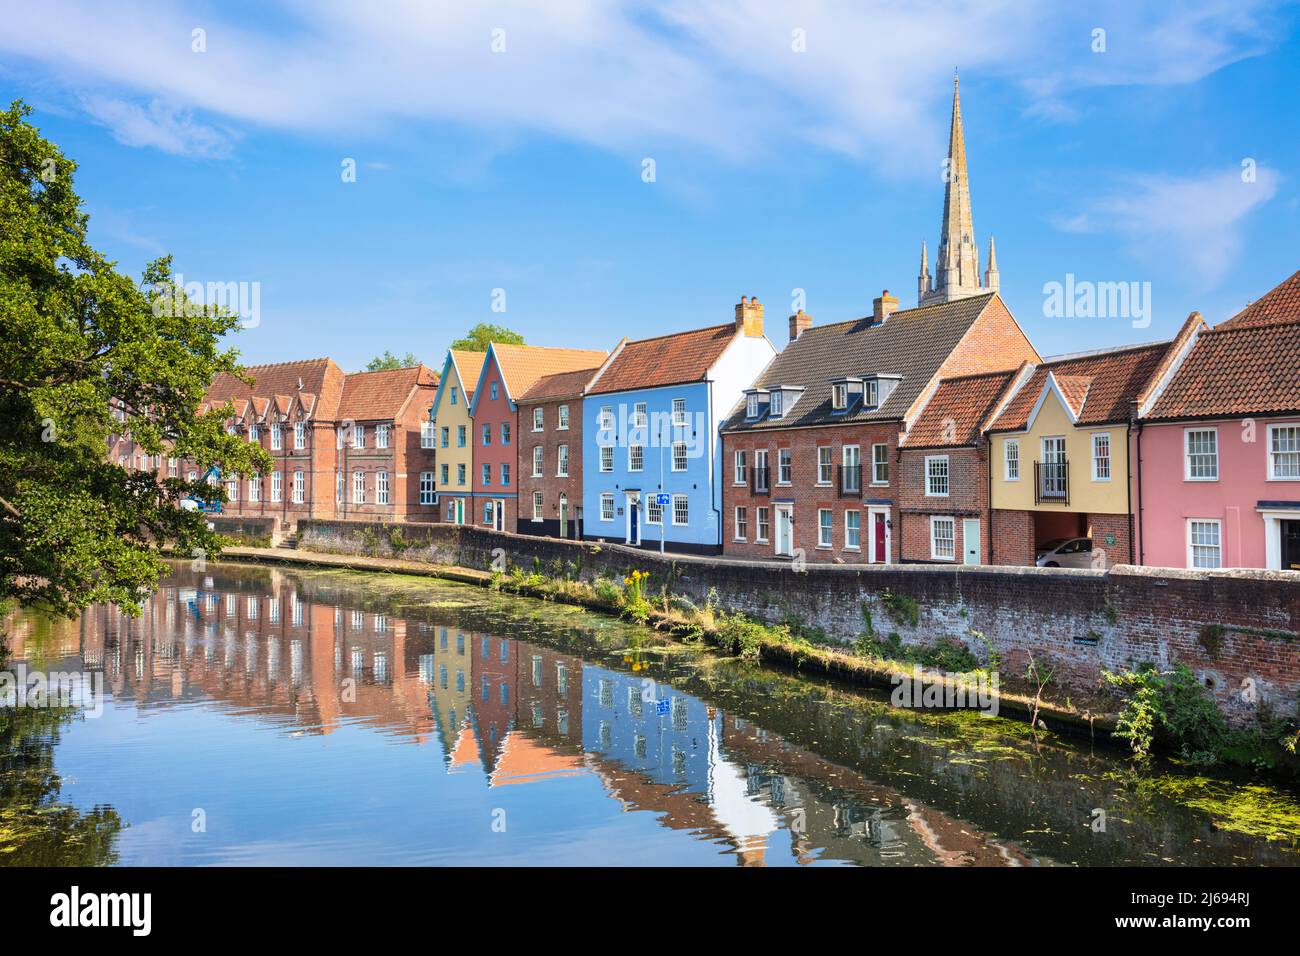 Narrow street Quayside and bright painted houses by the River Wensum, Norwich, Norfolk, East Anglia, England, United Kingdom Stock Photo